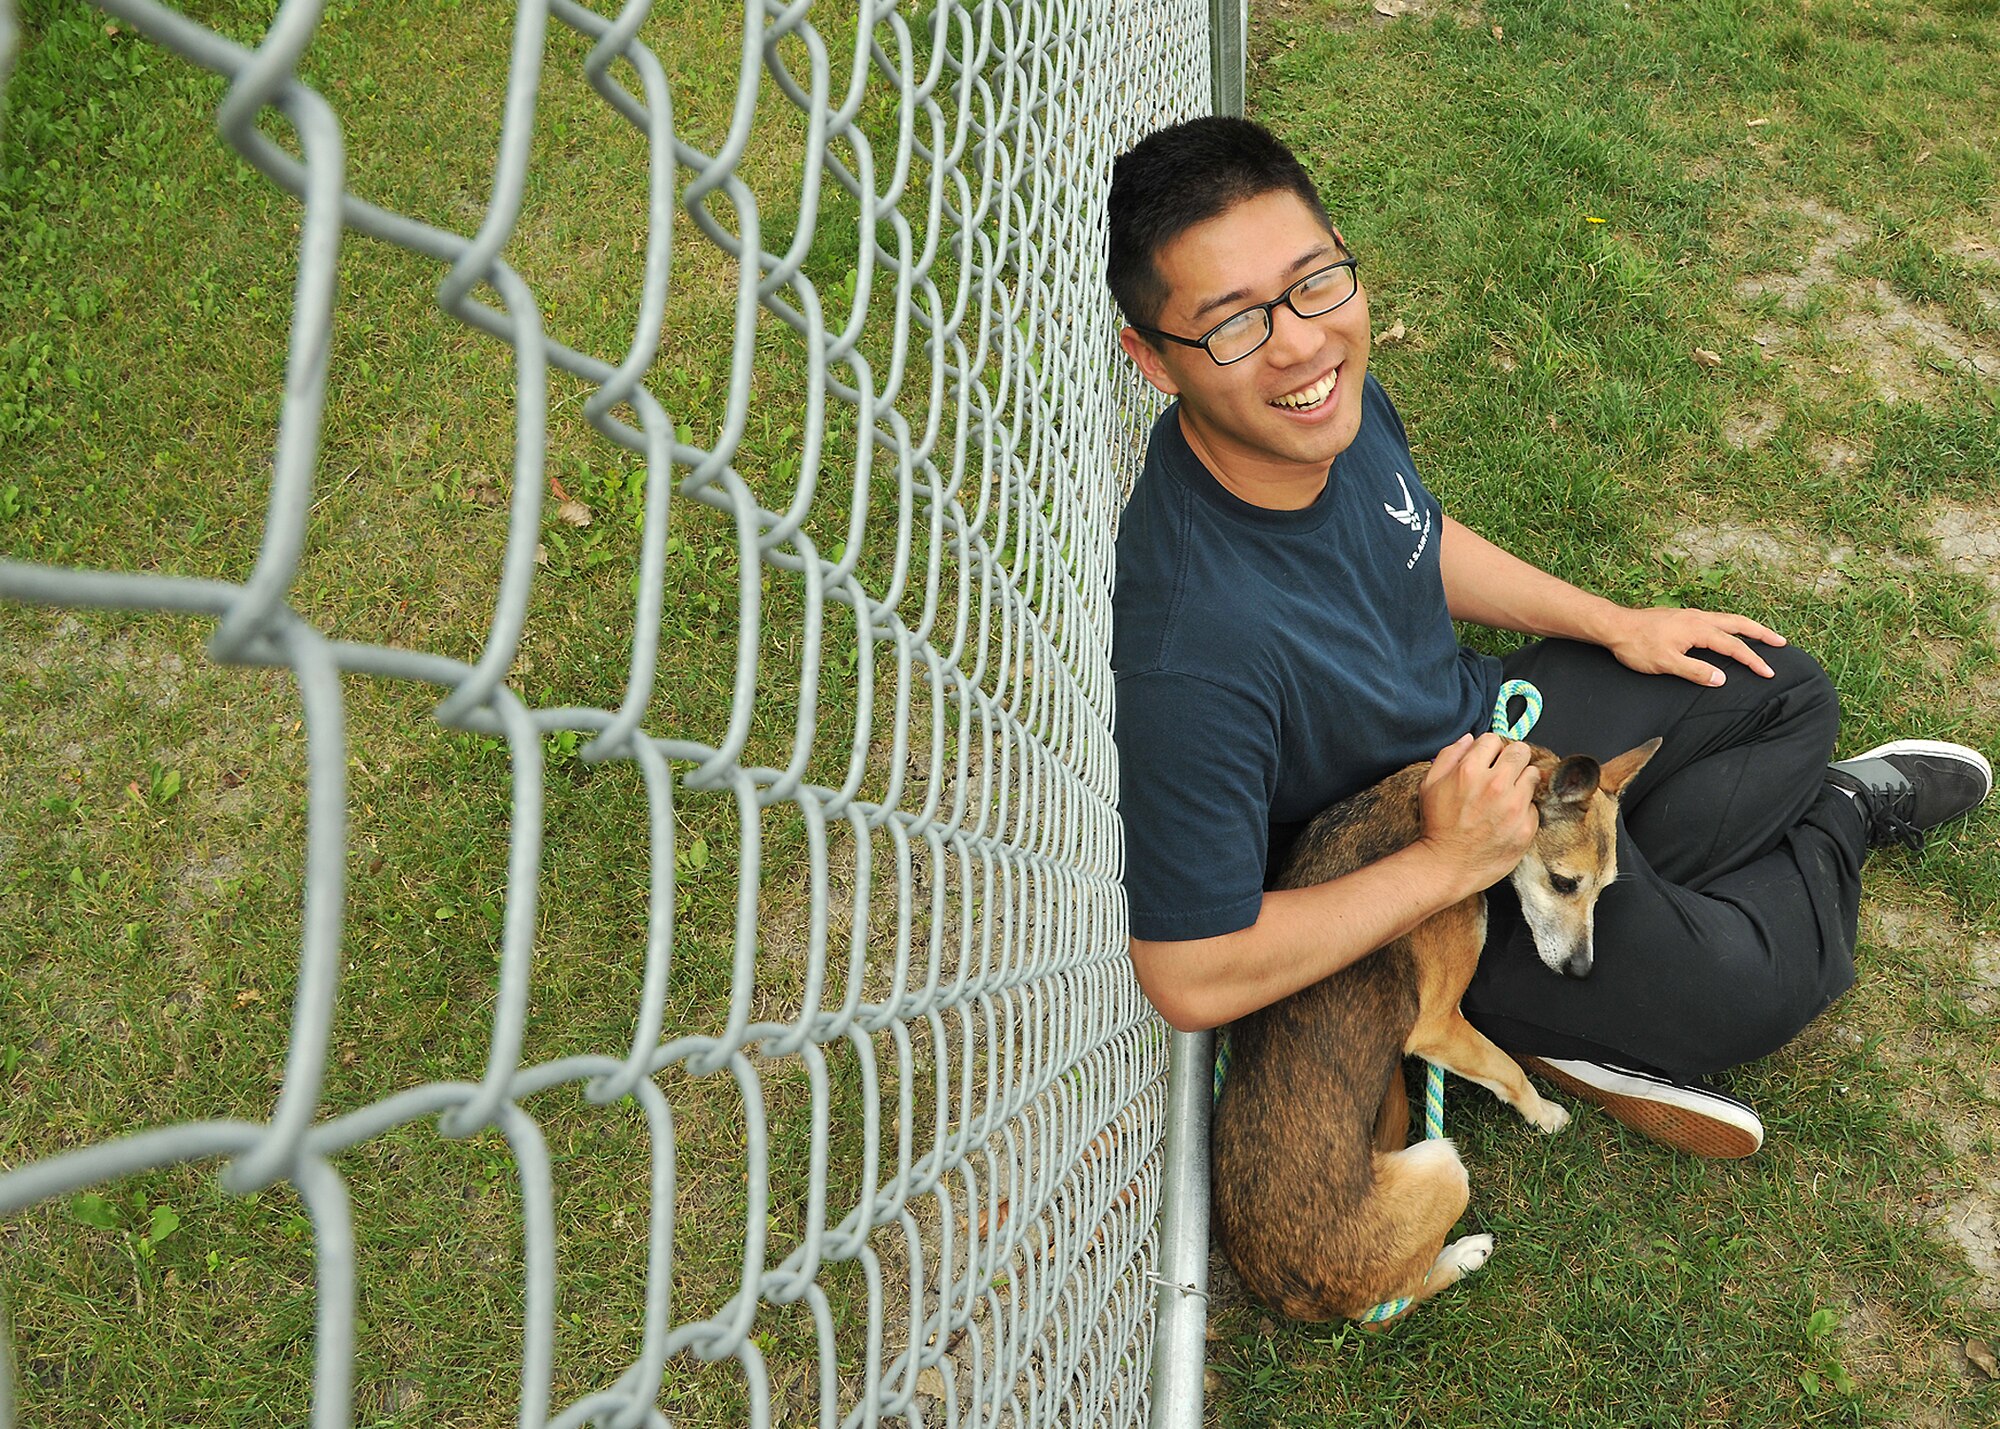 Airman 1st Class Namhoon Kim, 319th Logistics Readiness Squadron customer support apprentice, pets Sherri, a German shepherd, at the Circle of Friends Humane Society Aug. 6, 2014, in Grand Forks, N.D. The local animal shelter’s mission is to house and care for lost and unwanted animals, to place them into loving homes and to implement programs which increase awareness of volunteers’ responsibilities to all animals. (U.S. Air Force photo/Senior Airman Xavier Navarro)